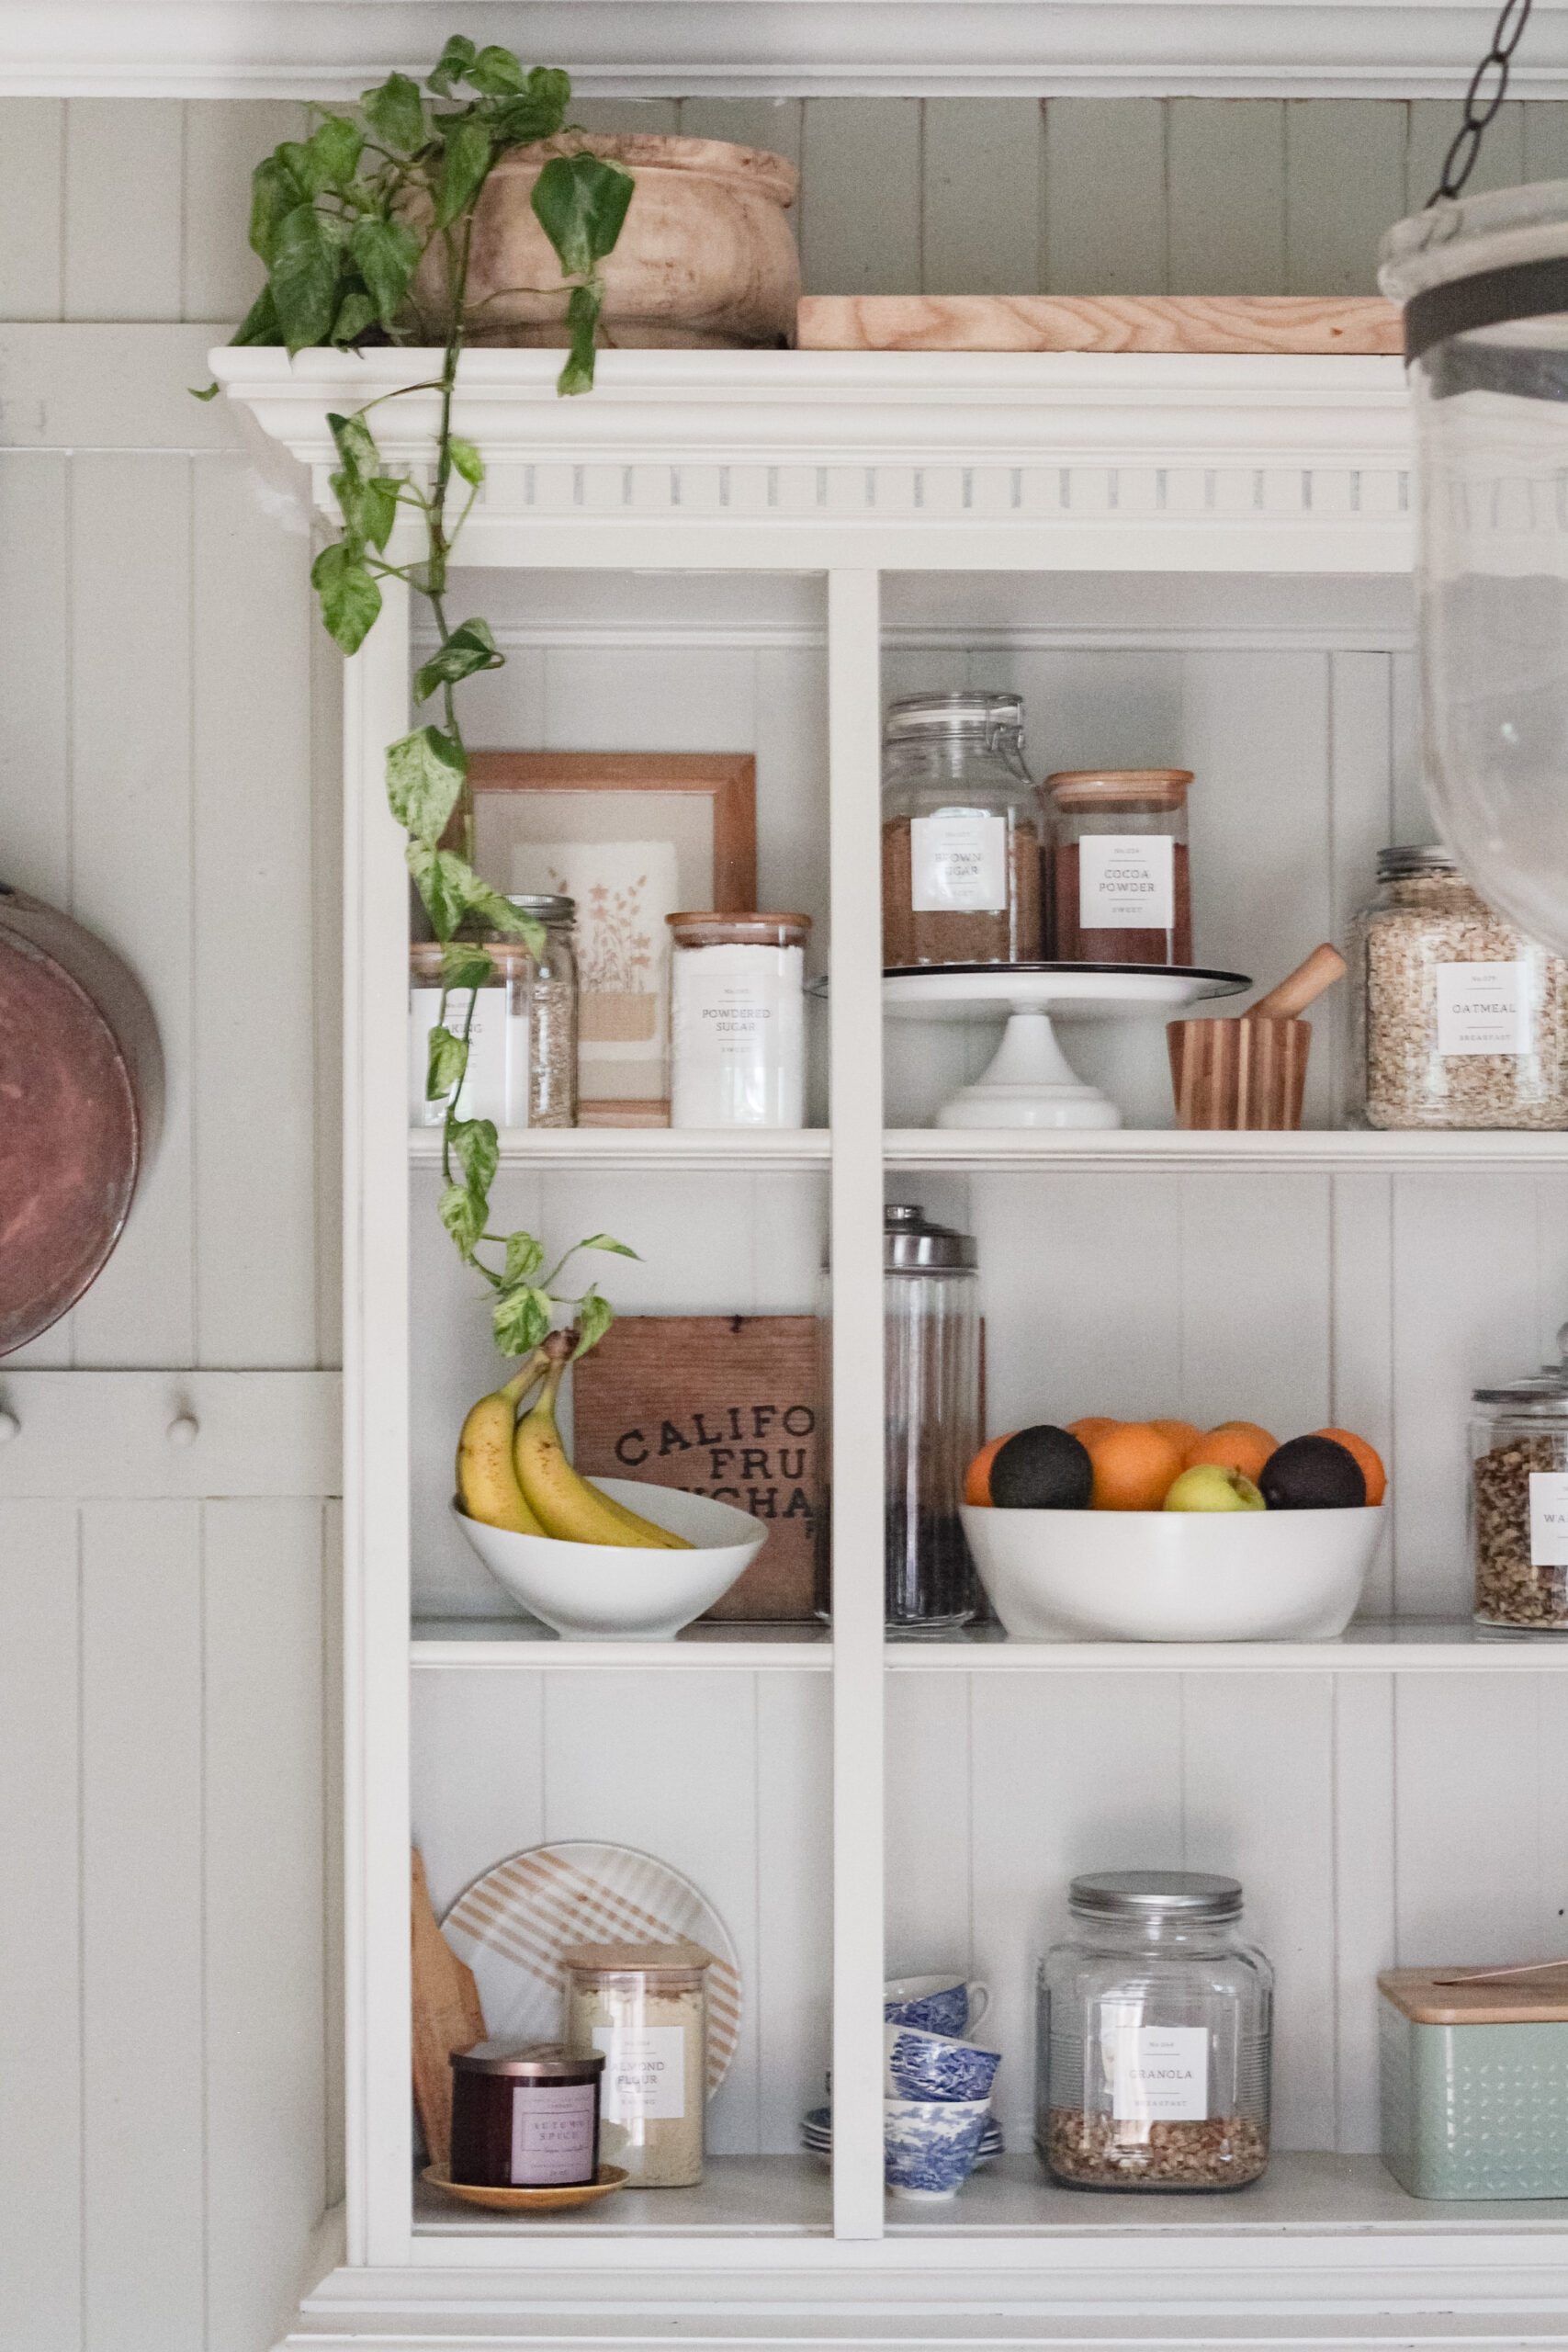 Where to buy the best glass storage containers for your kitchen (on a budget!)